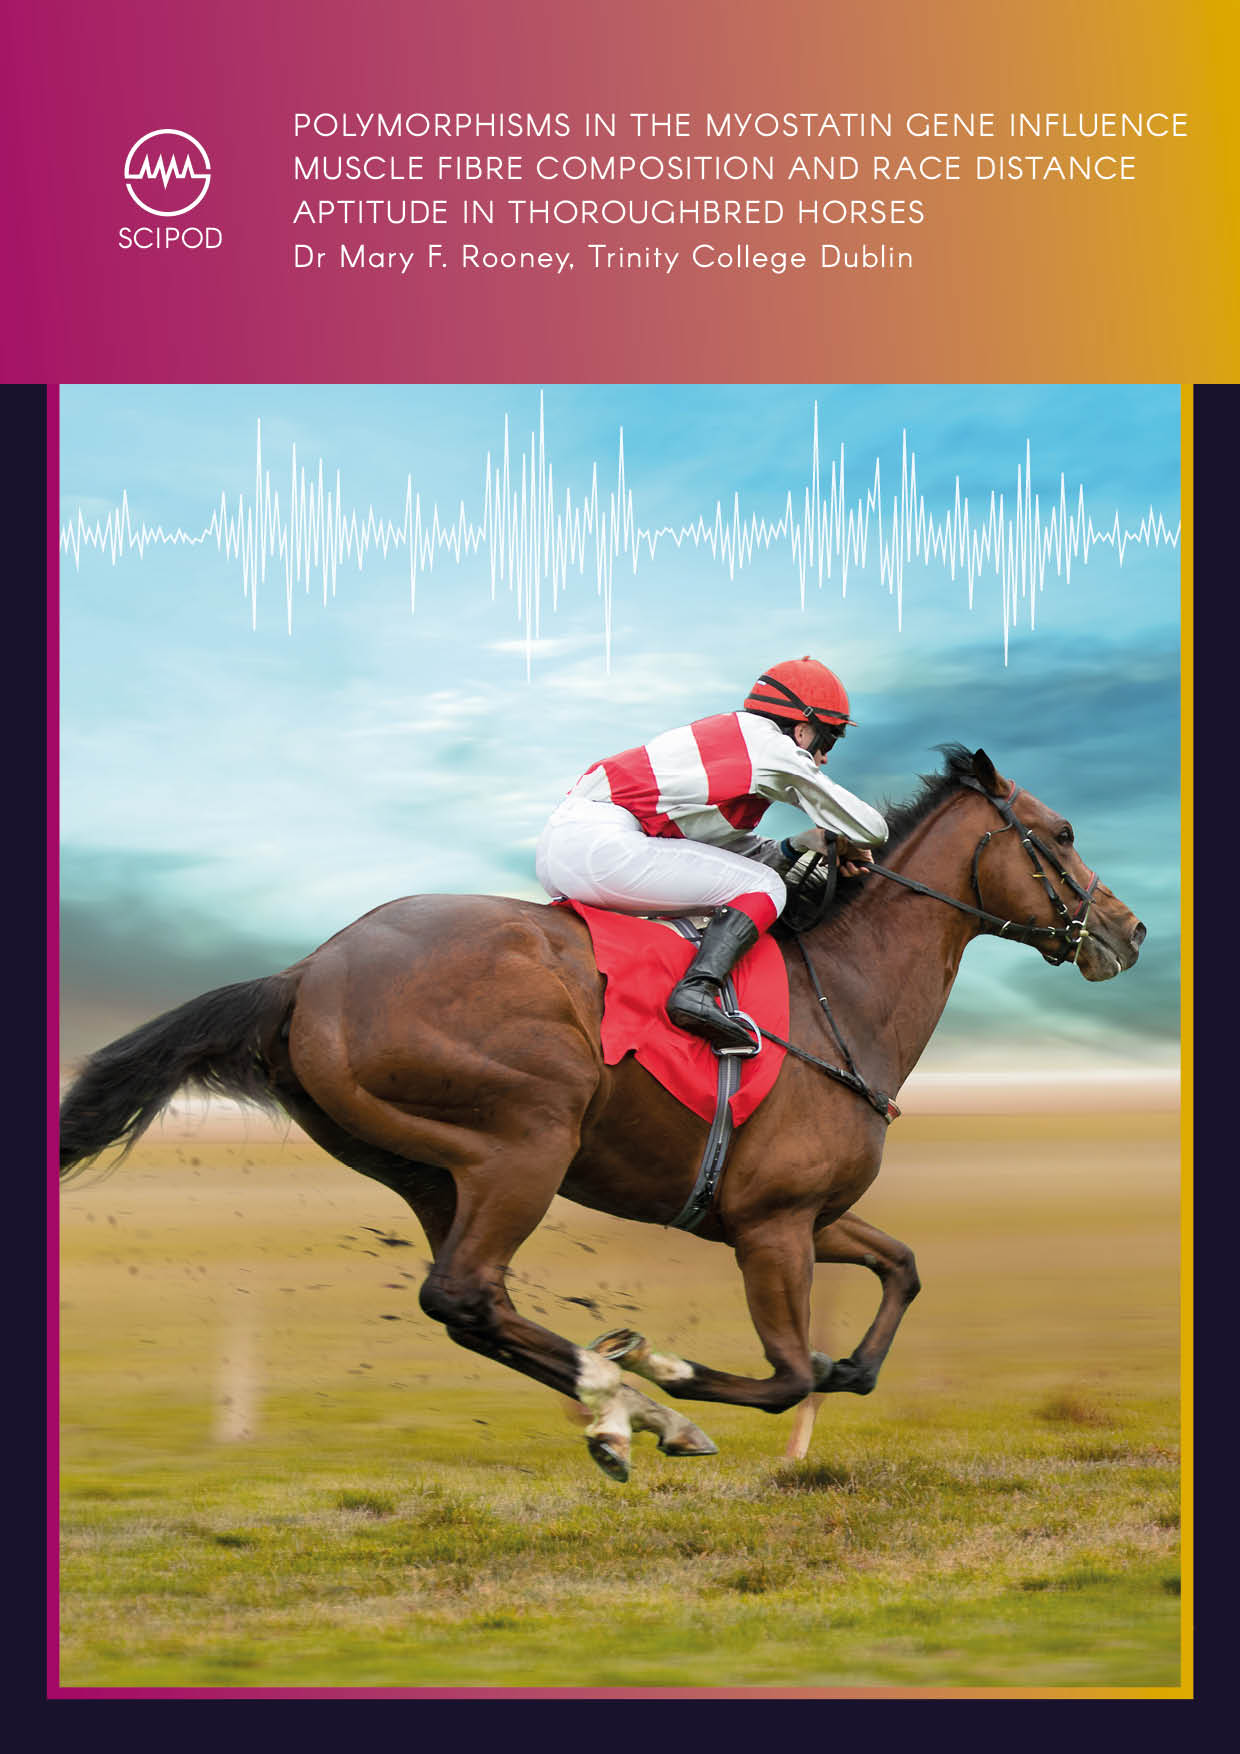 Polymorphisms in the Myostatin Gene Influence Muscle Fibre Composition and Race Distance Aptitude in Thoroughbred horses